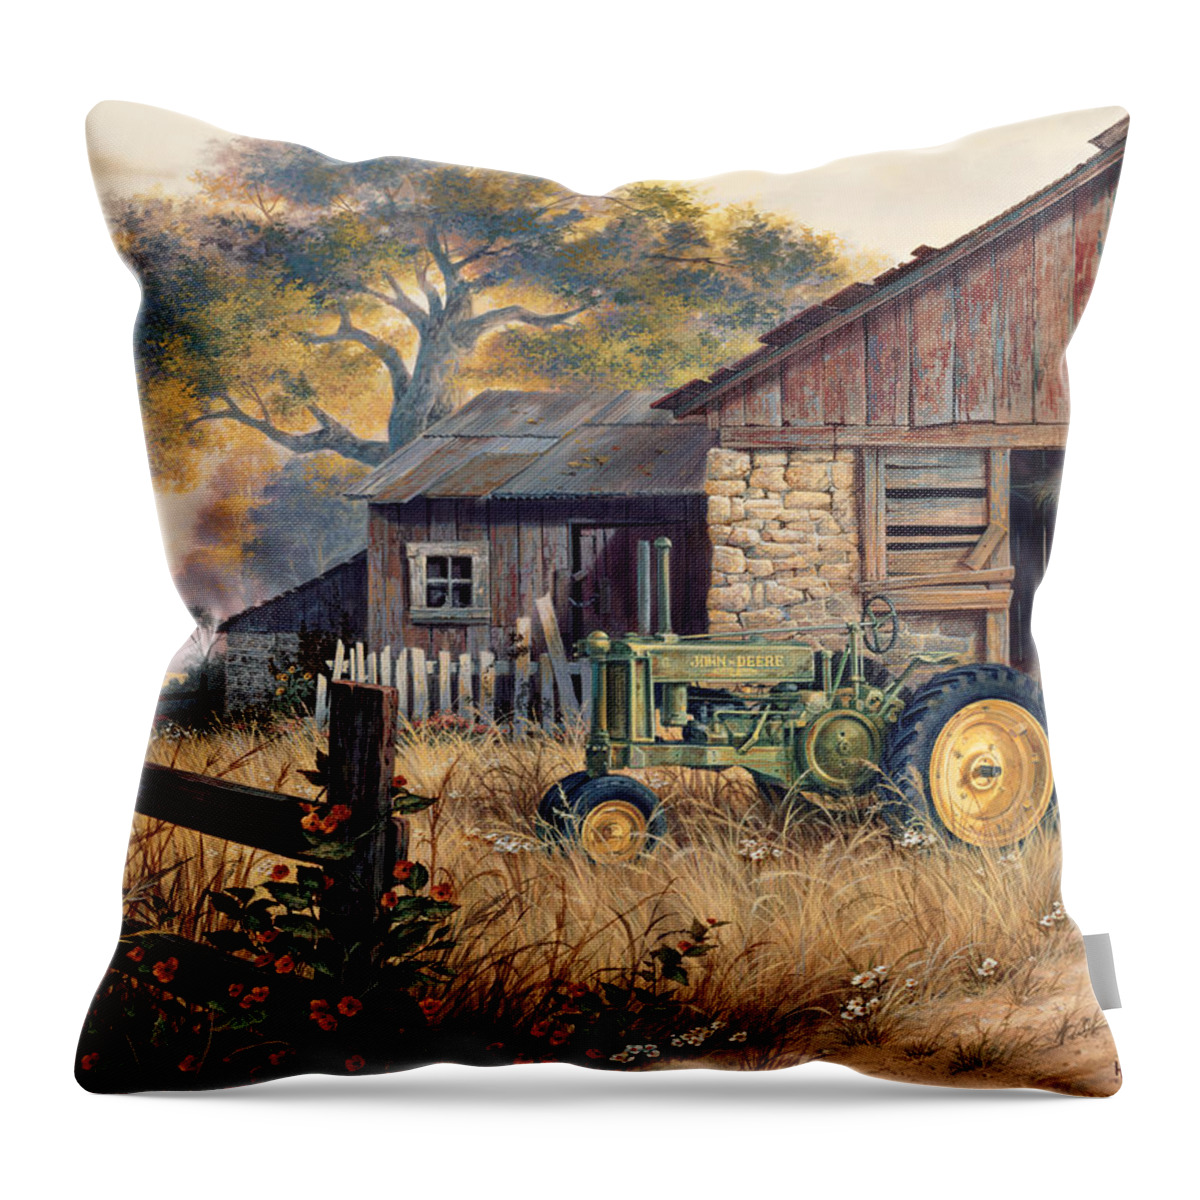 Michael Humphries Throw Pillow featuring the painting Deere Country by Michael Humphries